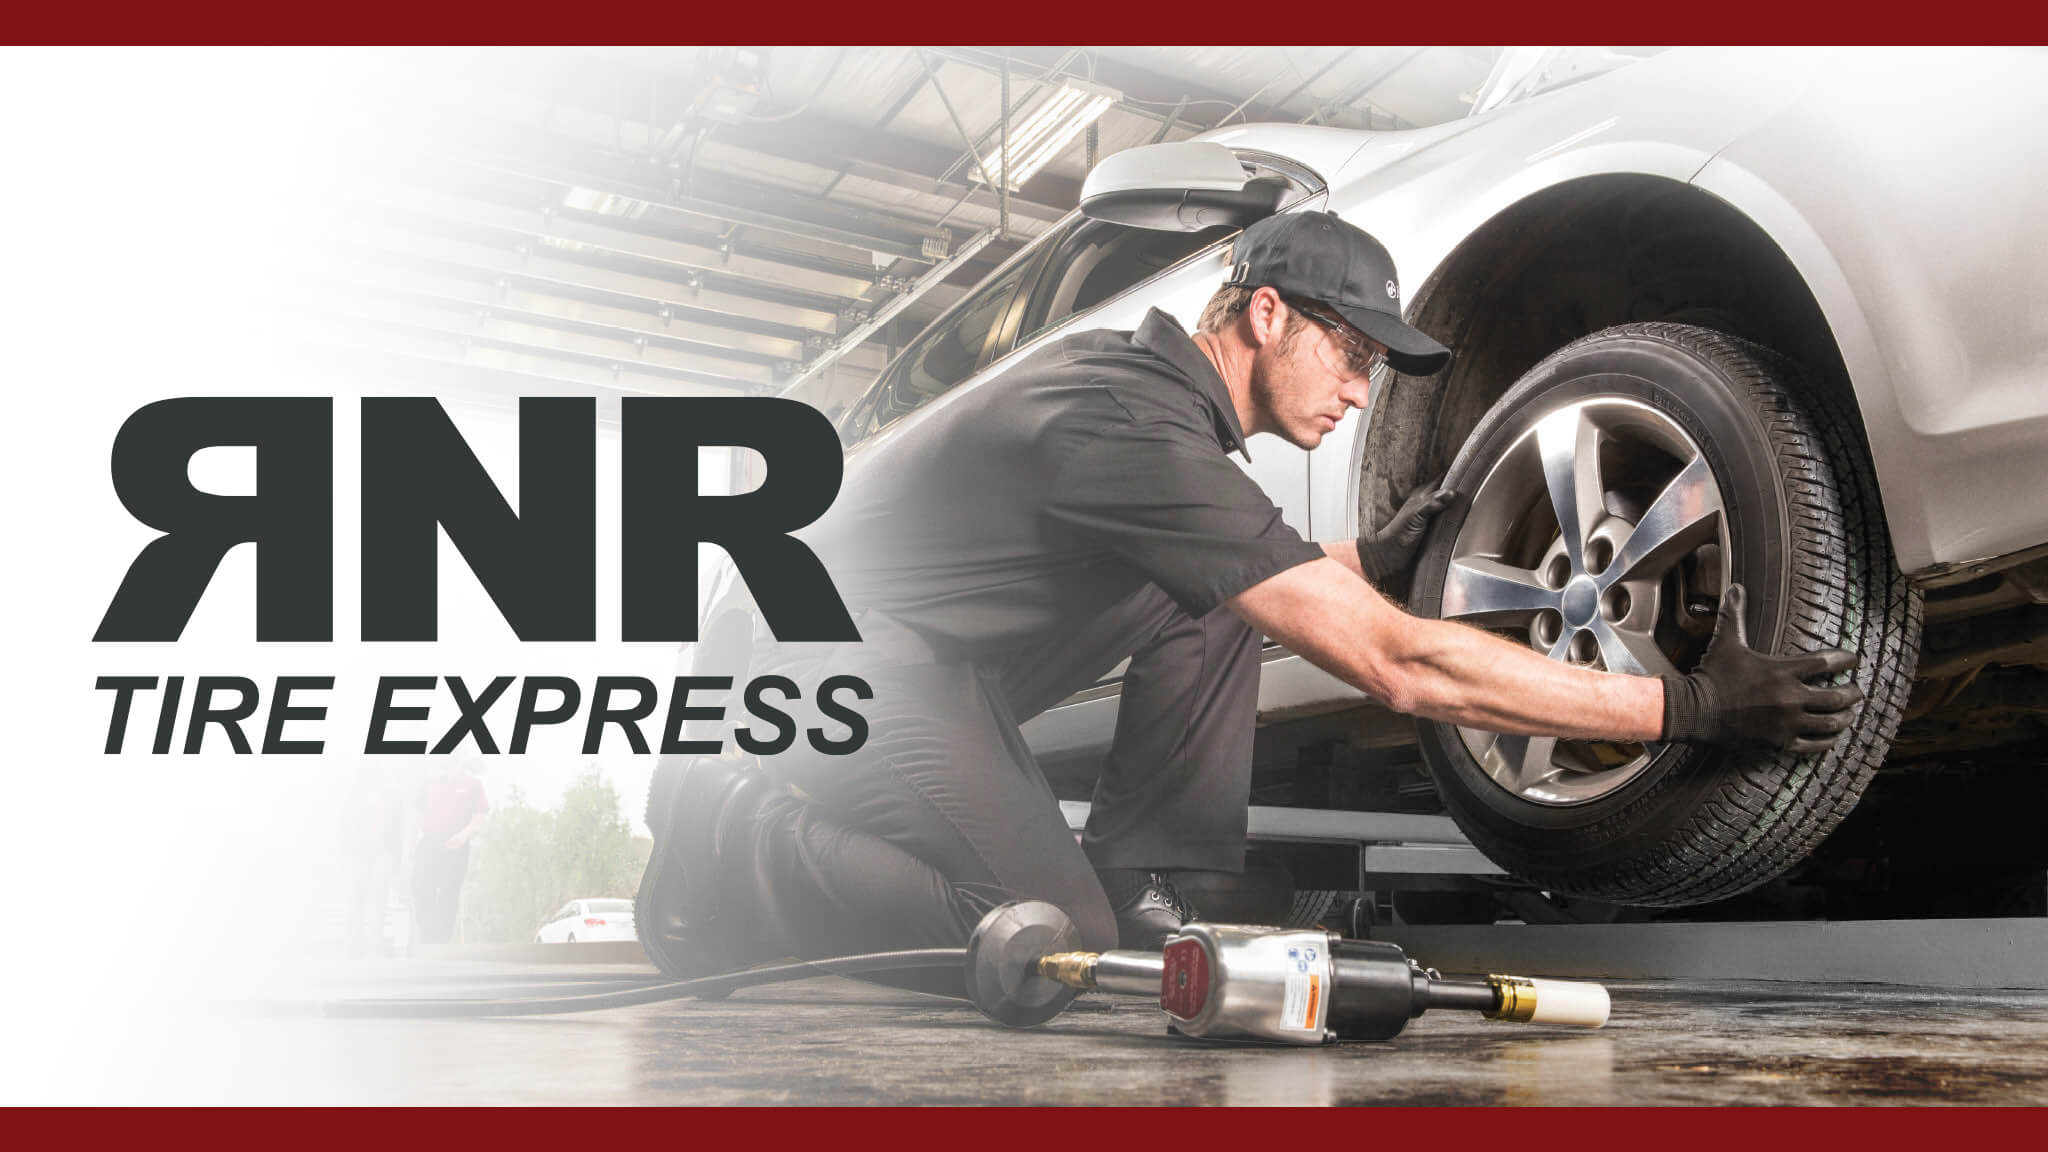 RNR Tire Express | Tires, Wheels, & Alignments | Easy Payment ...